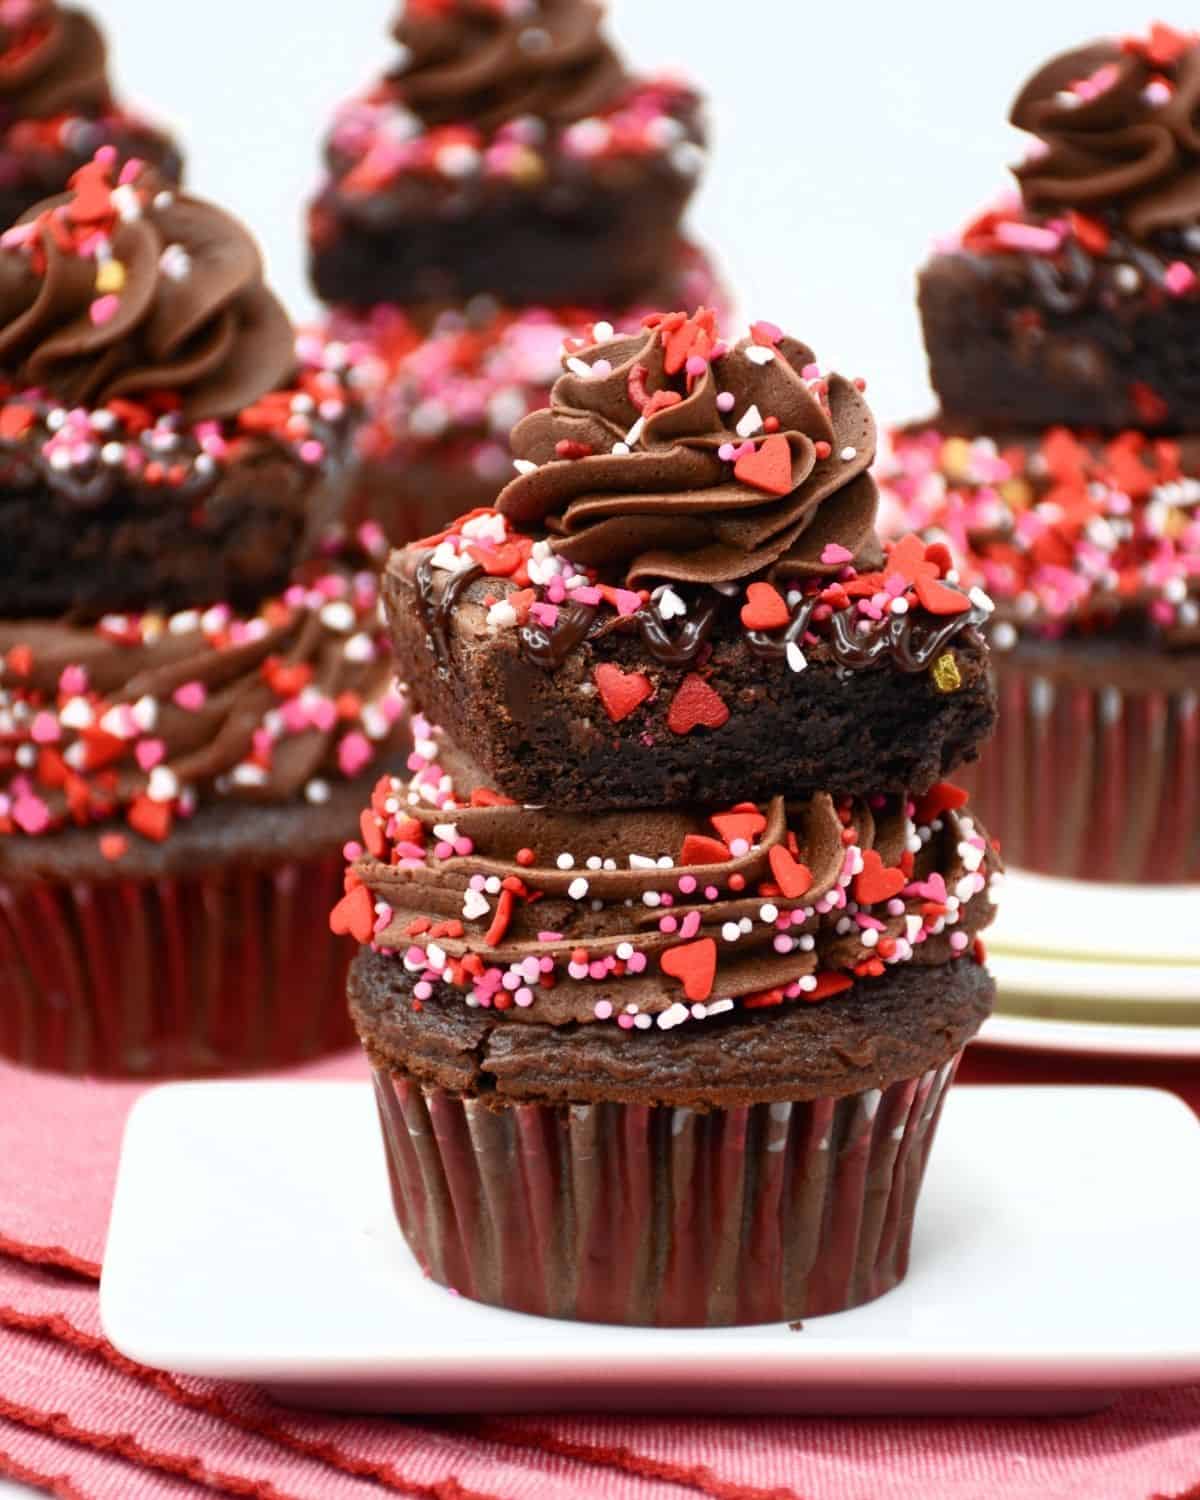 Valentines Day homemade cupcakes with chocolate frosting and sprinkles topped with a brown and more festive sprinkles.